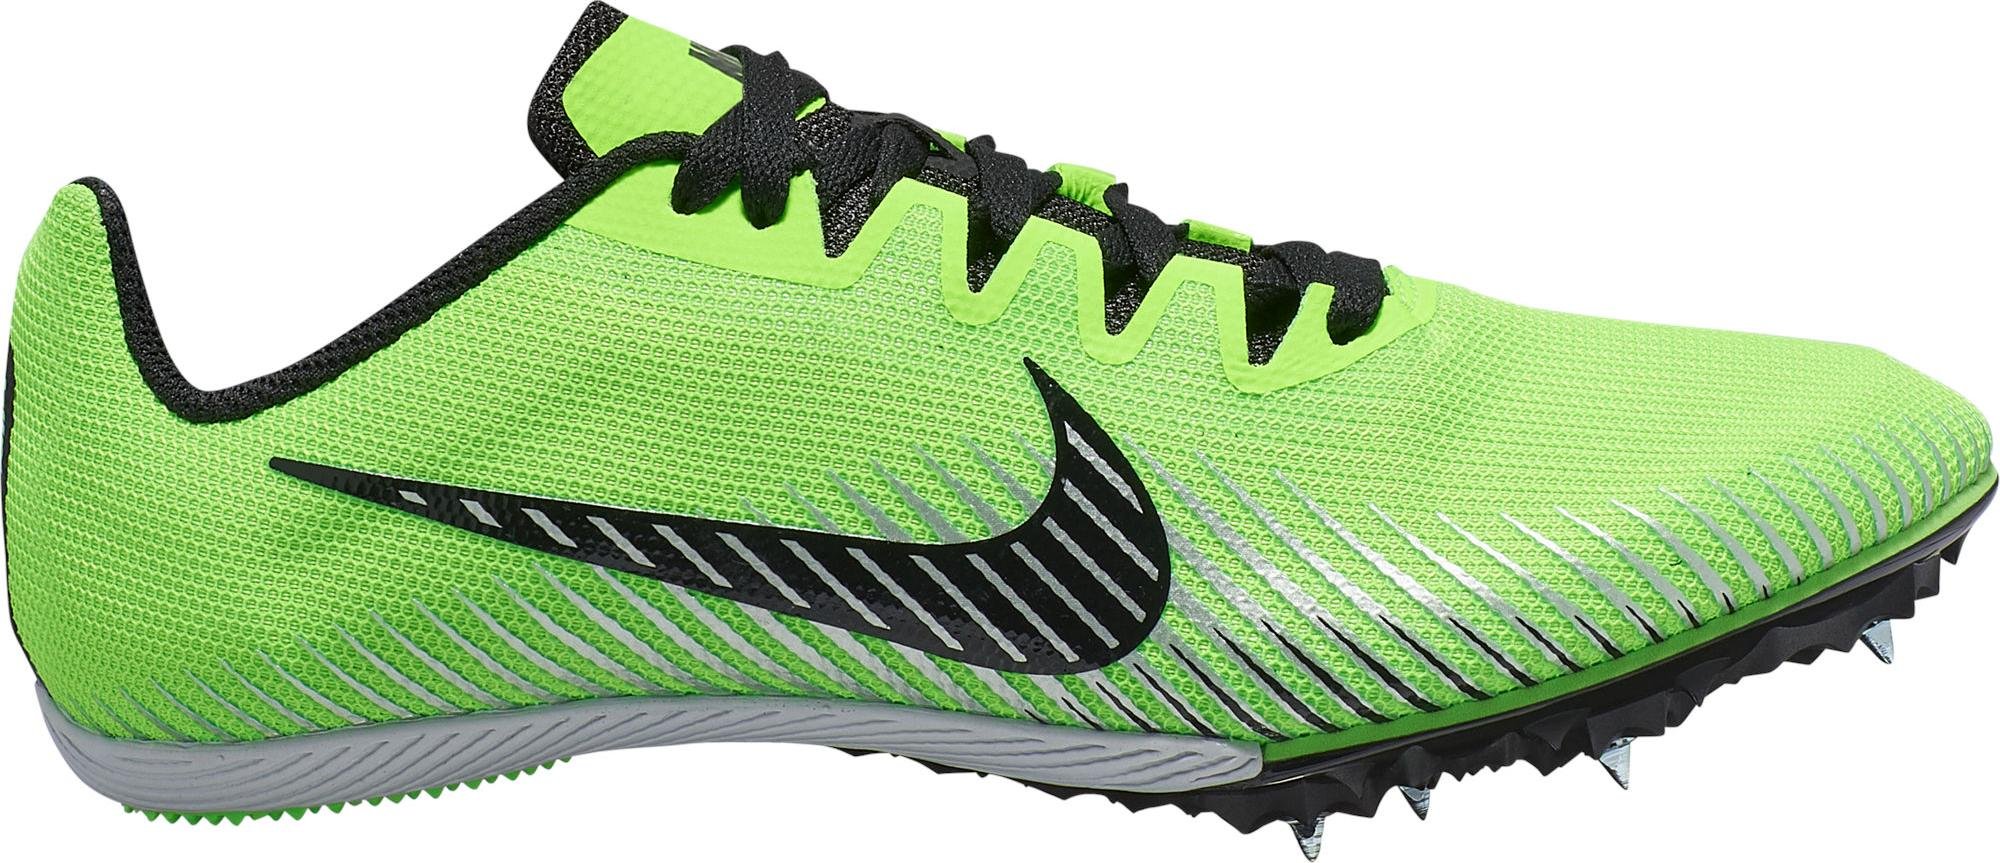 Track shoes/Spikes Nike ZOOM RIVAL M 9 - Top4Football.com